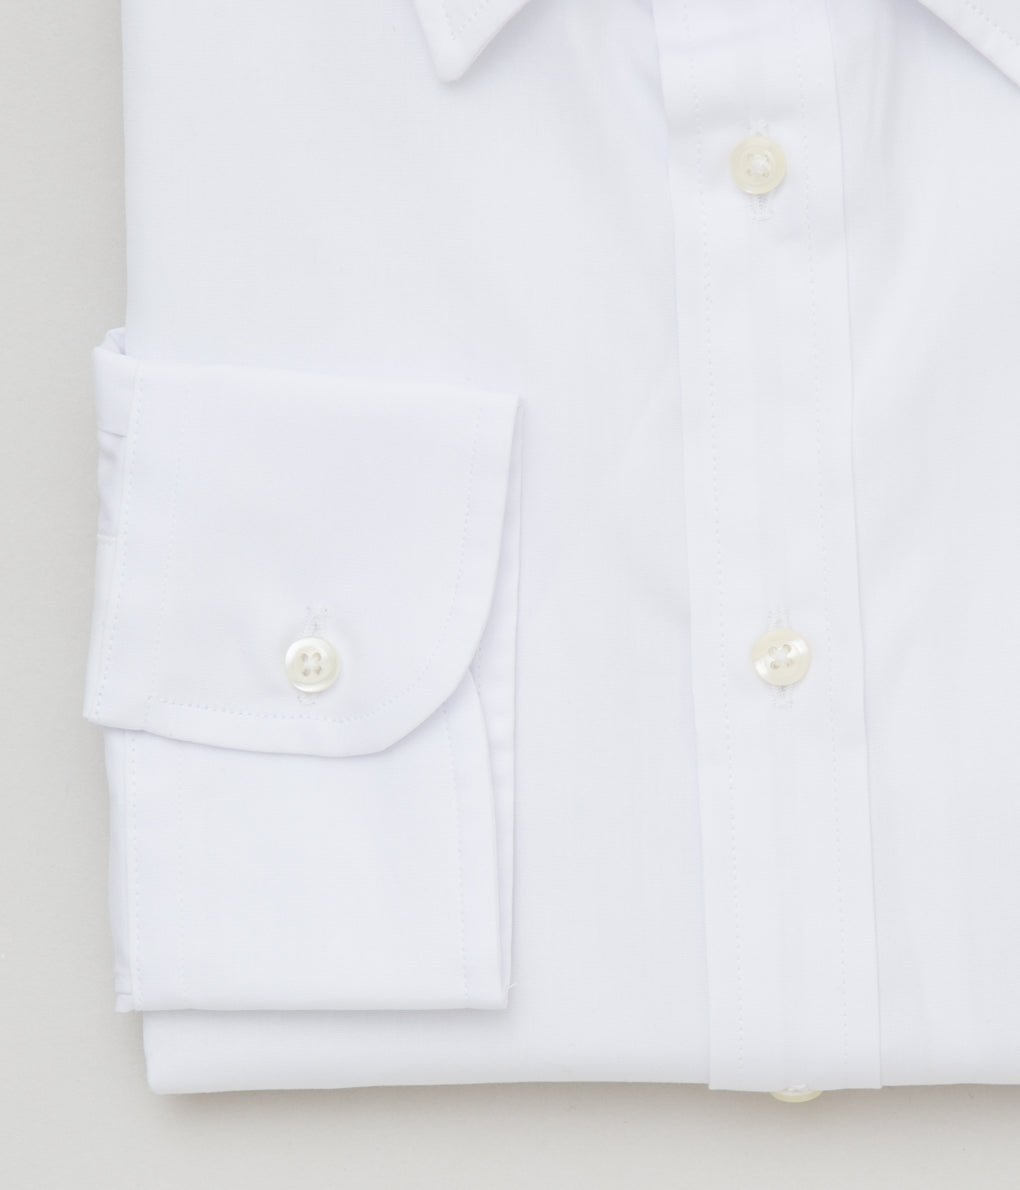 INDIVIDUALIZED SHIRTS "POPLIN (STANDARD FIT TRADITIONAL COLLAR SHIRT)"(WHITE)